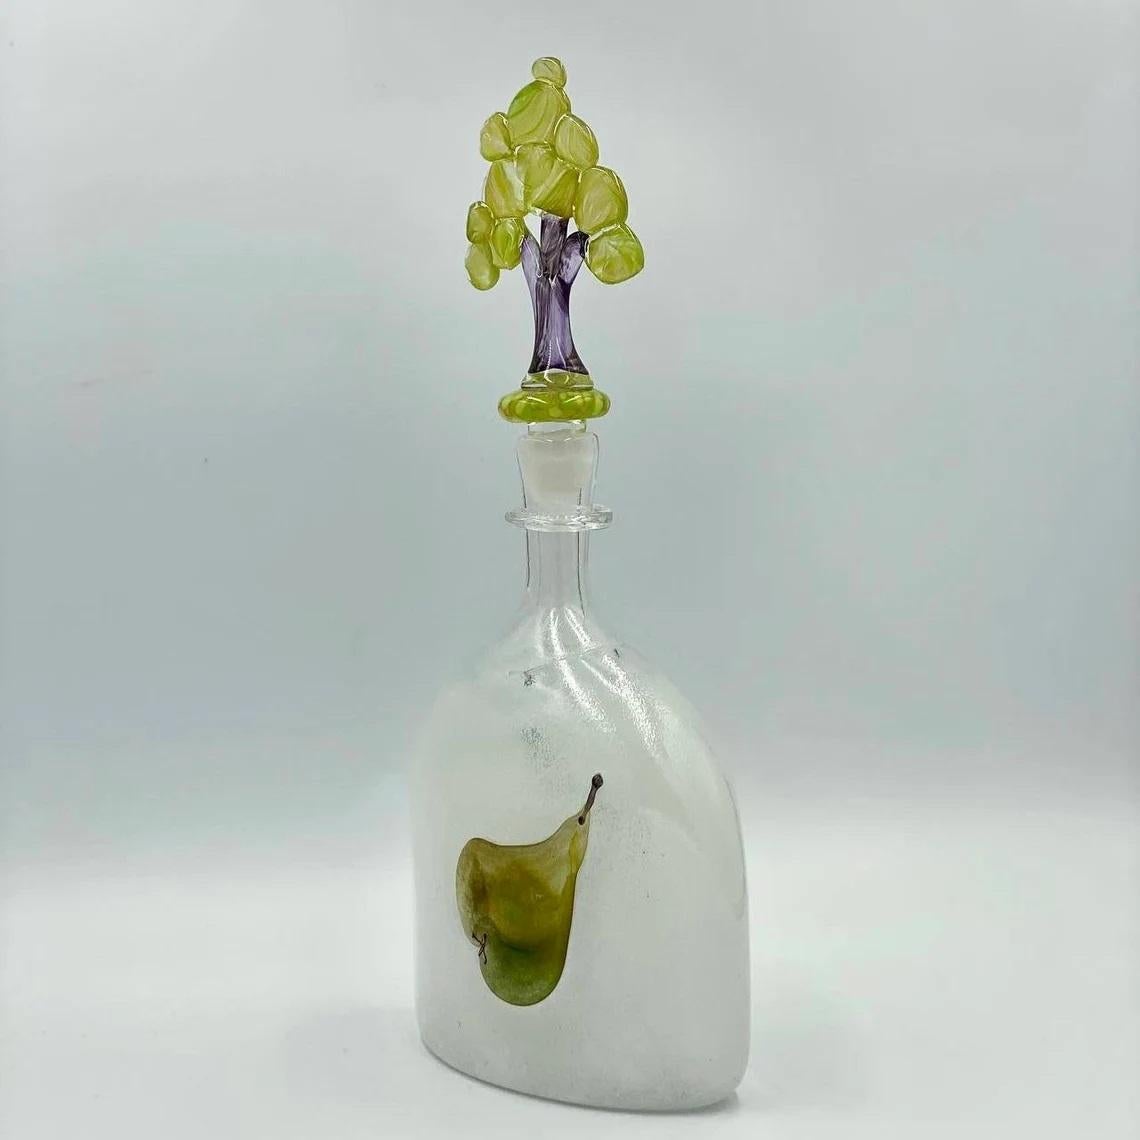 Rare Beautiful Decanter with Glass Stopper in the shape of Tree.

This Decanter made in Venice, Murano.

Made of Murano Glass.

Vintage.

In excellent condition, no chips, cracks or crazing.

Dimensions:

Height with Stopper - 13.4 in 34